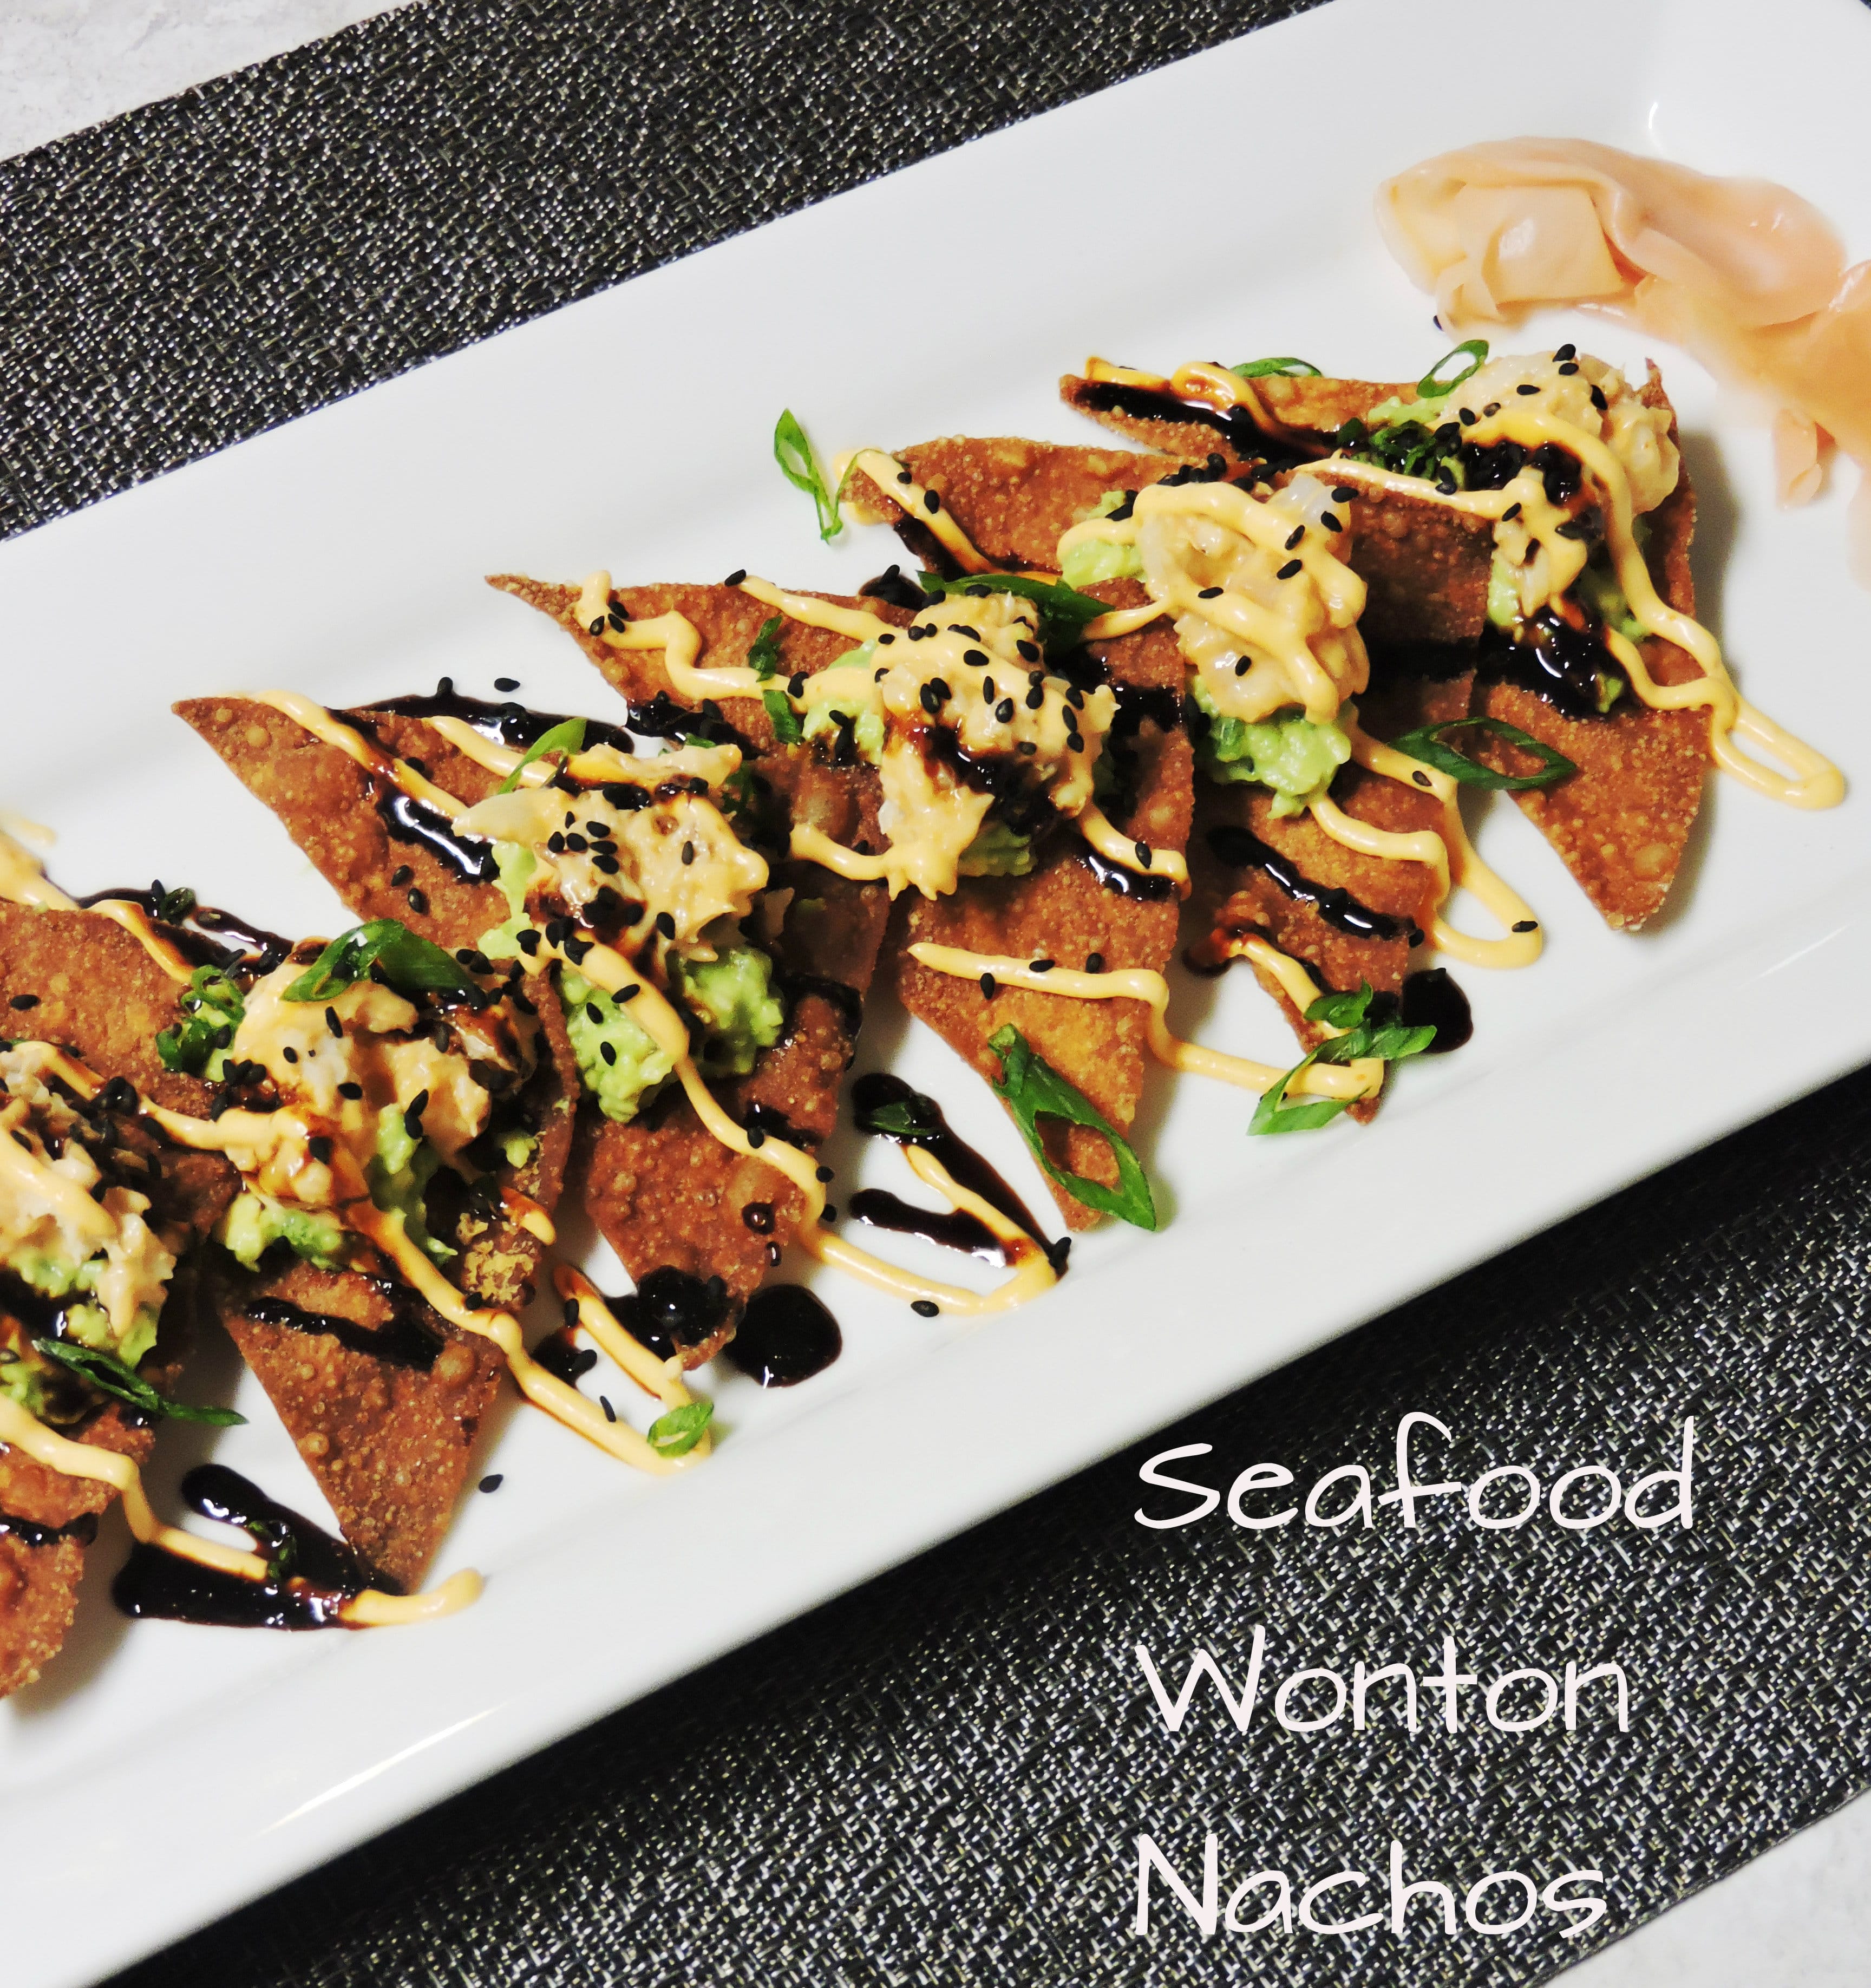 Seafood Wonton Nachos Cooks Well With Others